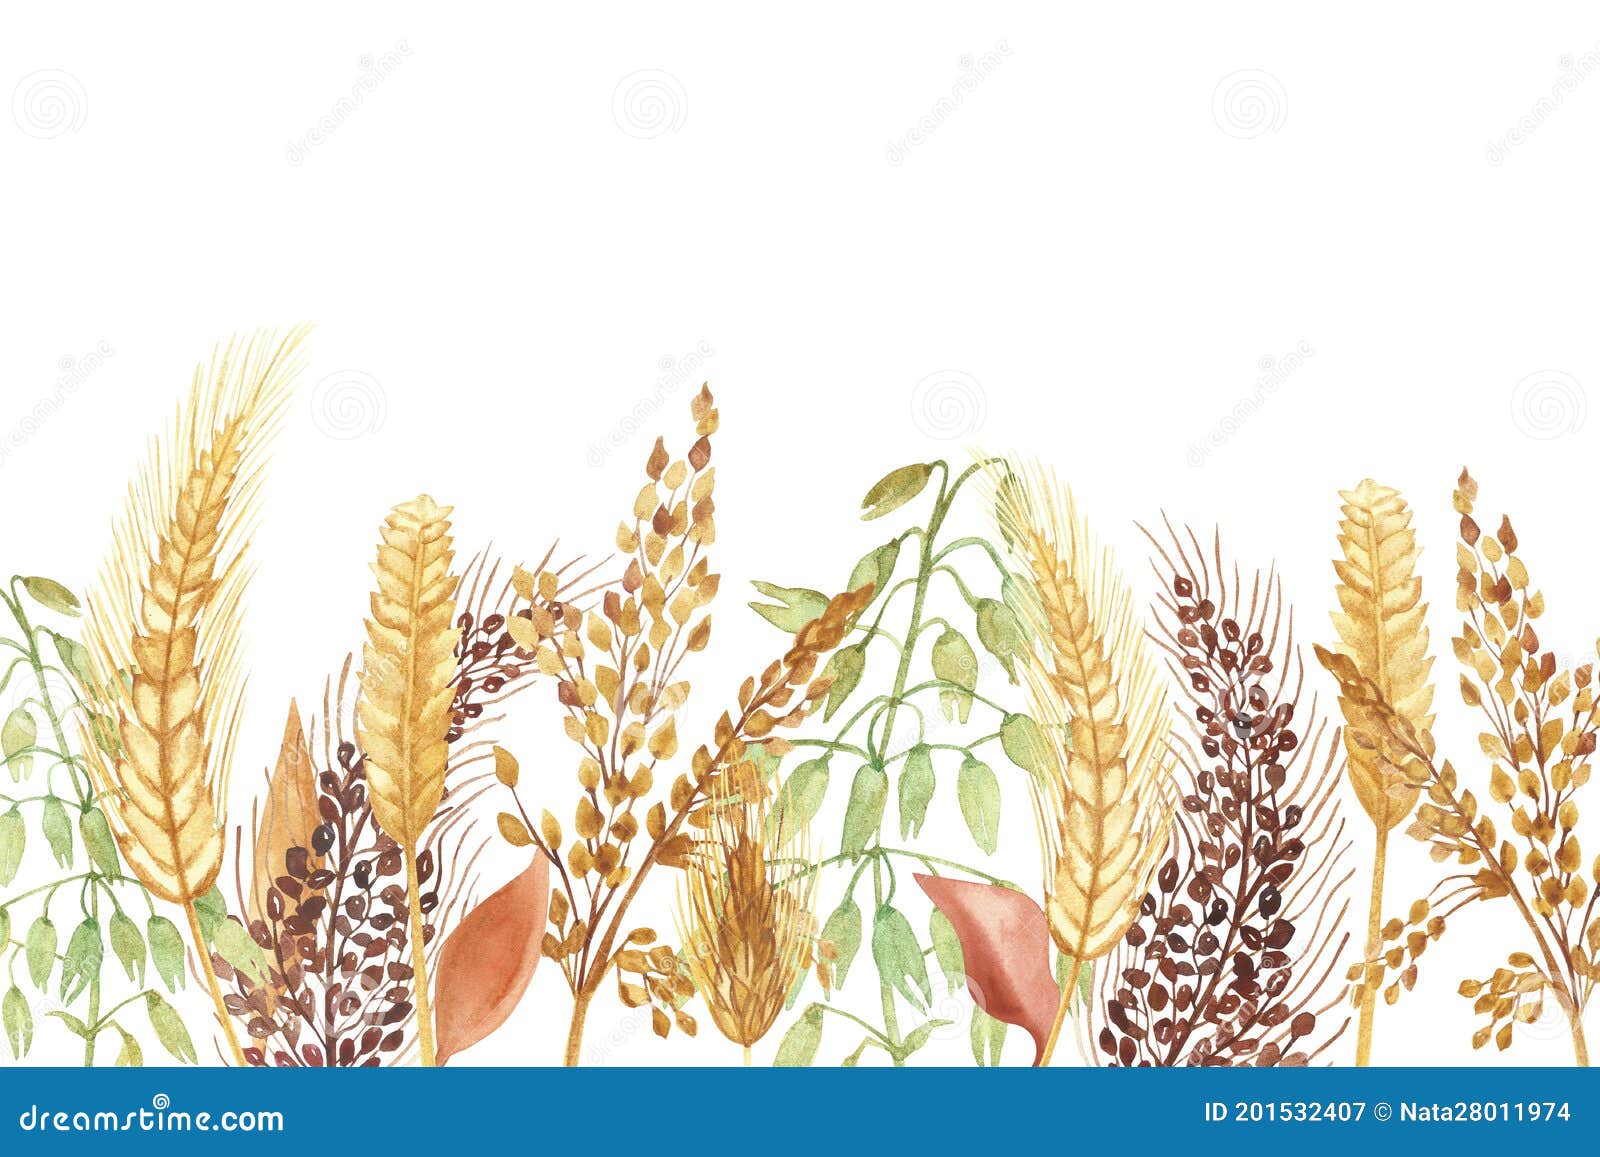 watercolor hand painted nature grain field banner composition with golden rye ear, green and brown cereal ranches and orange leave